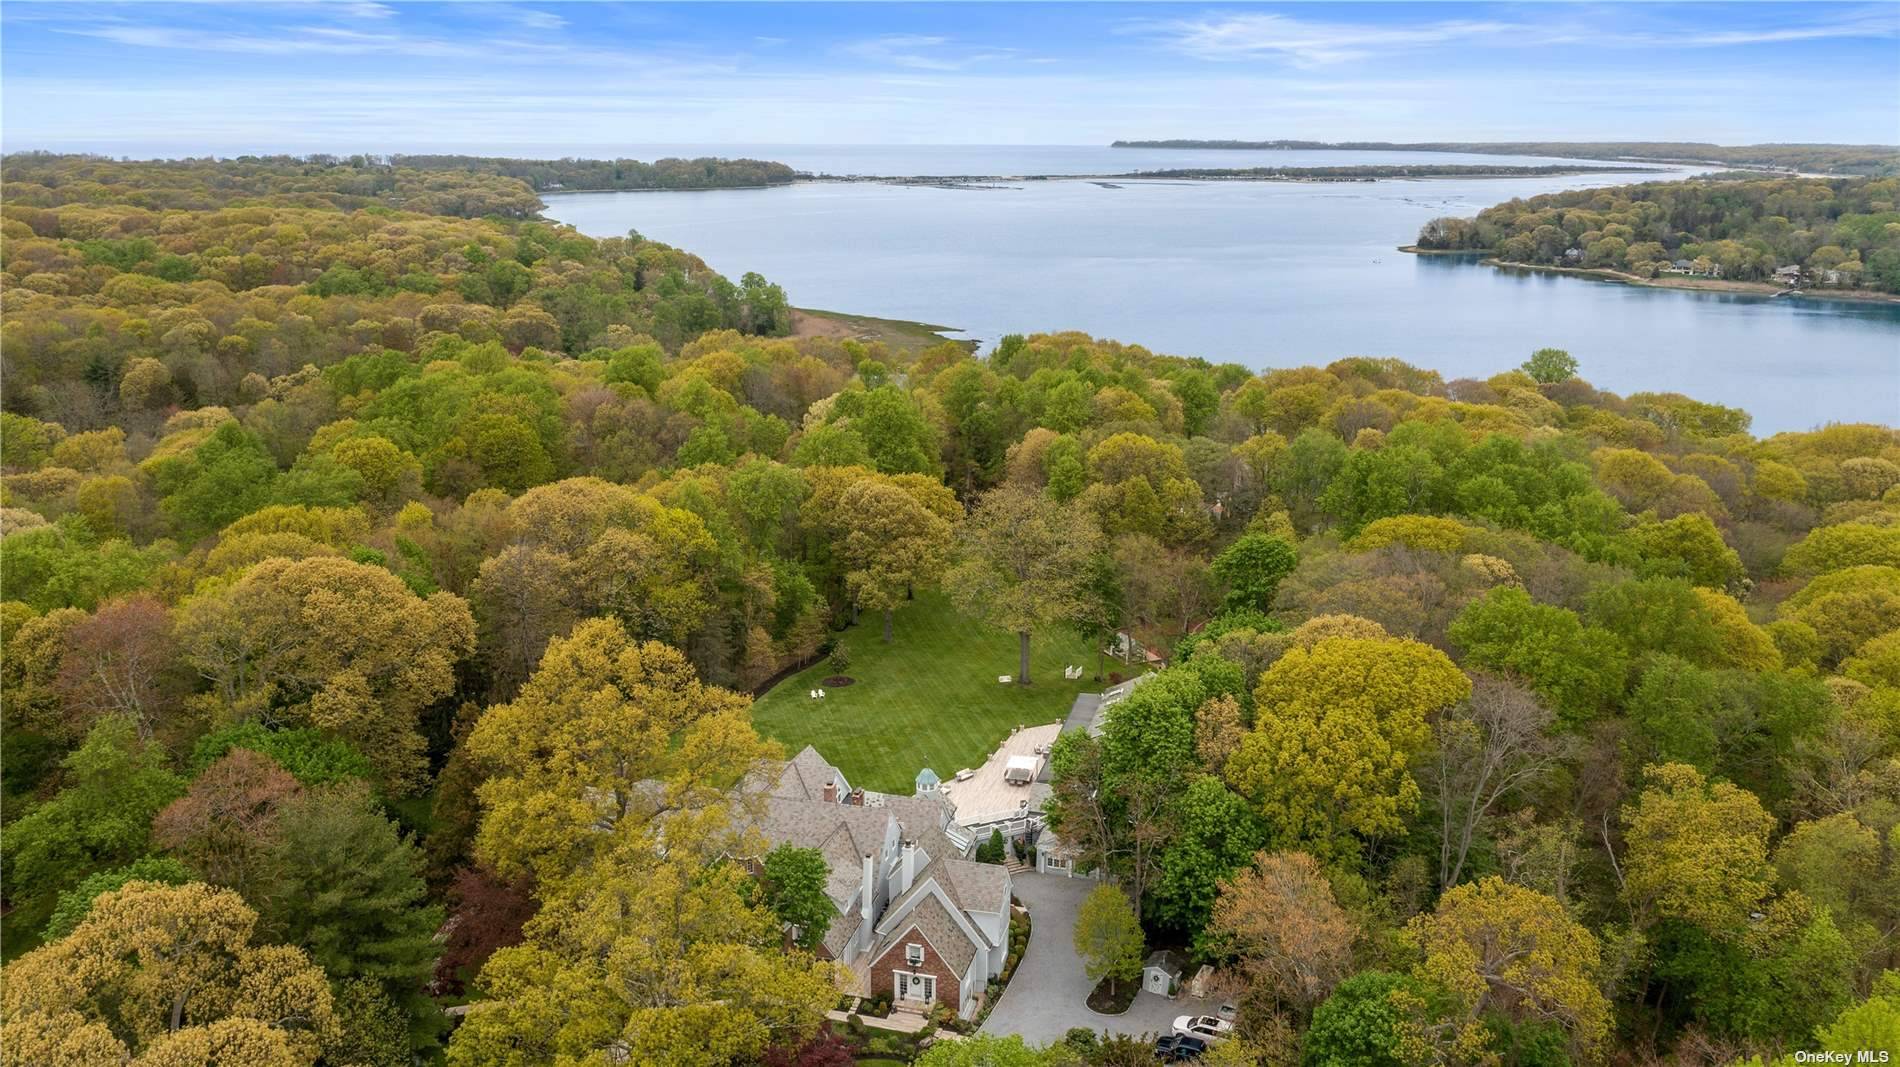 SWAN MANOR ! Perfectly Situated On Just Over Nine Lush Private Acres In The Heart Of Nissequogue Lies This Magnificent Gated Estate With Grand Scale Elegance.